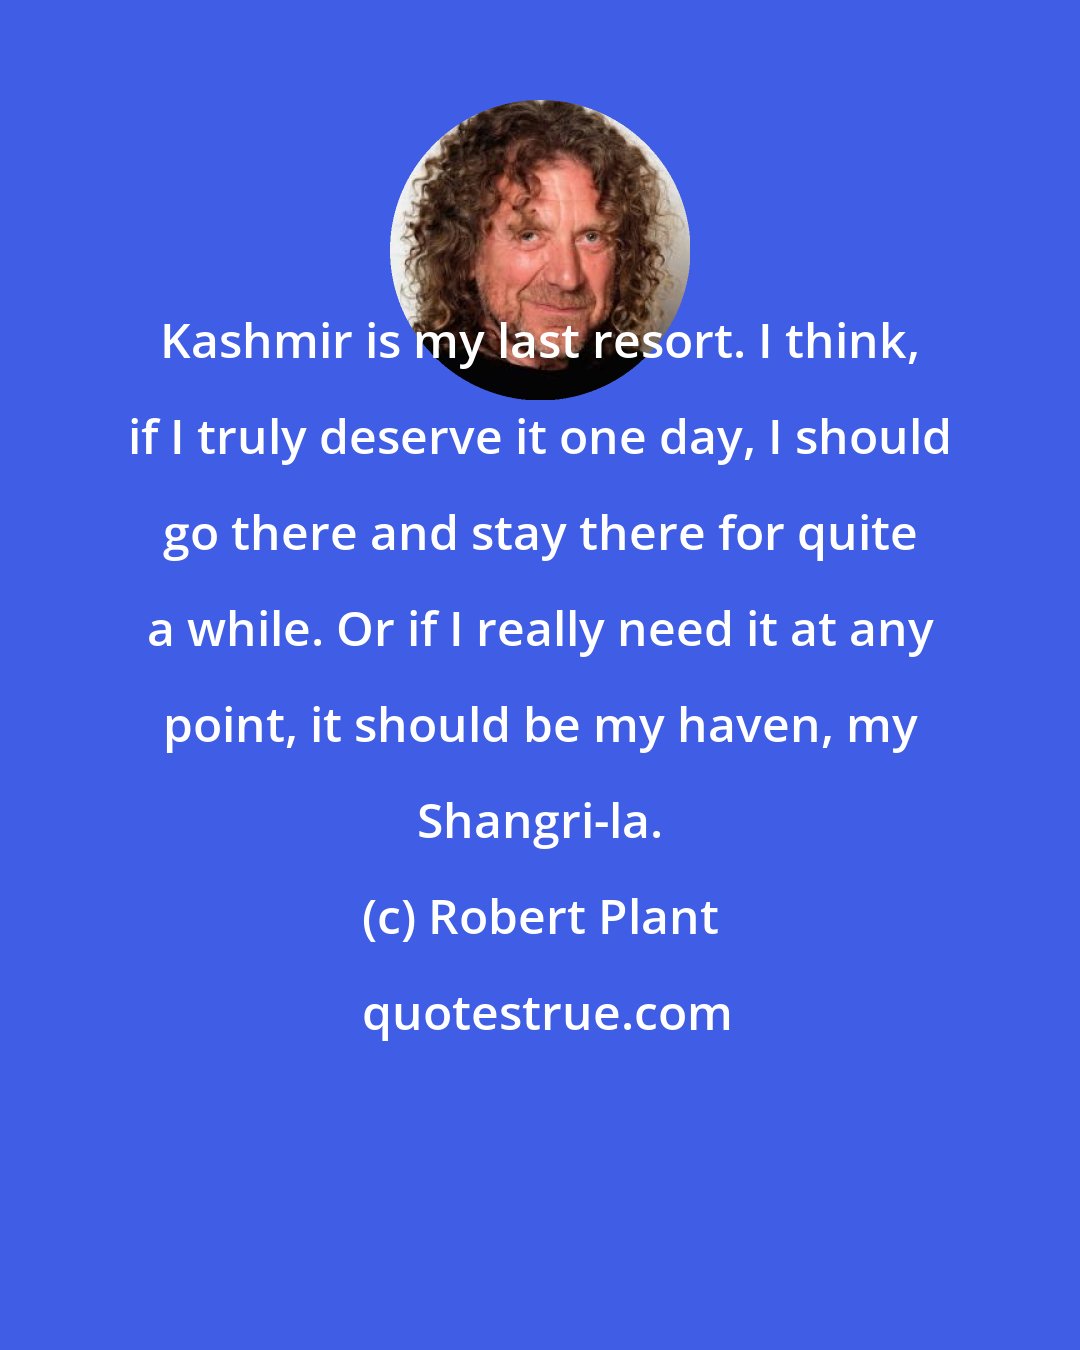 Robert Plant: Kashmir is my last resort. I think, if I truly deserve it one day, I should go there and stay there for quite a while. Or if I really need it at any point, it should be my haven, my Shangri-la.